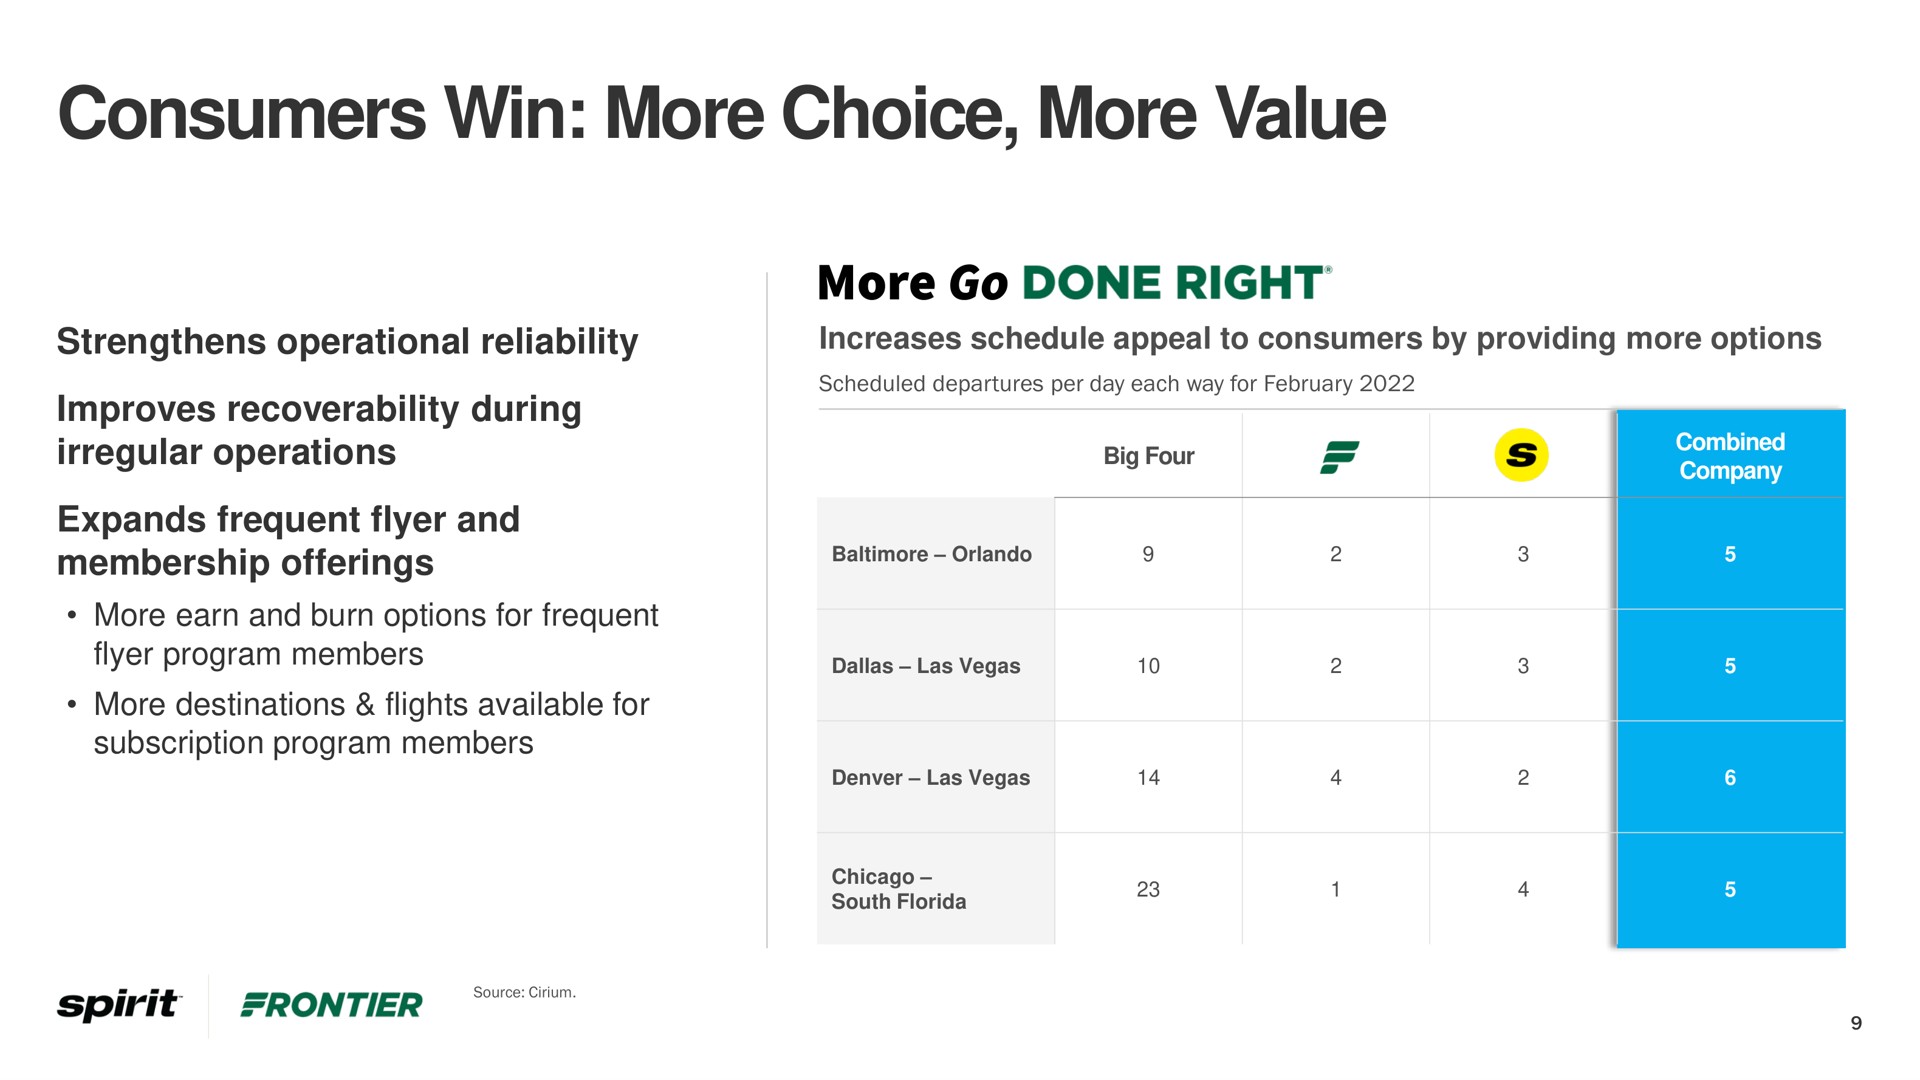 consumers win more choice more value | Frontier